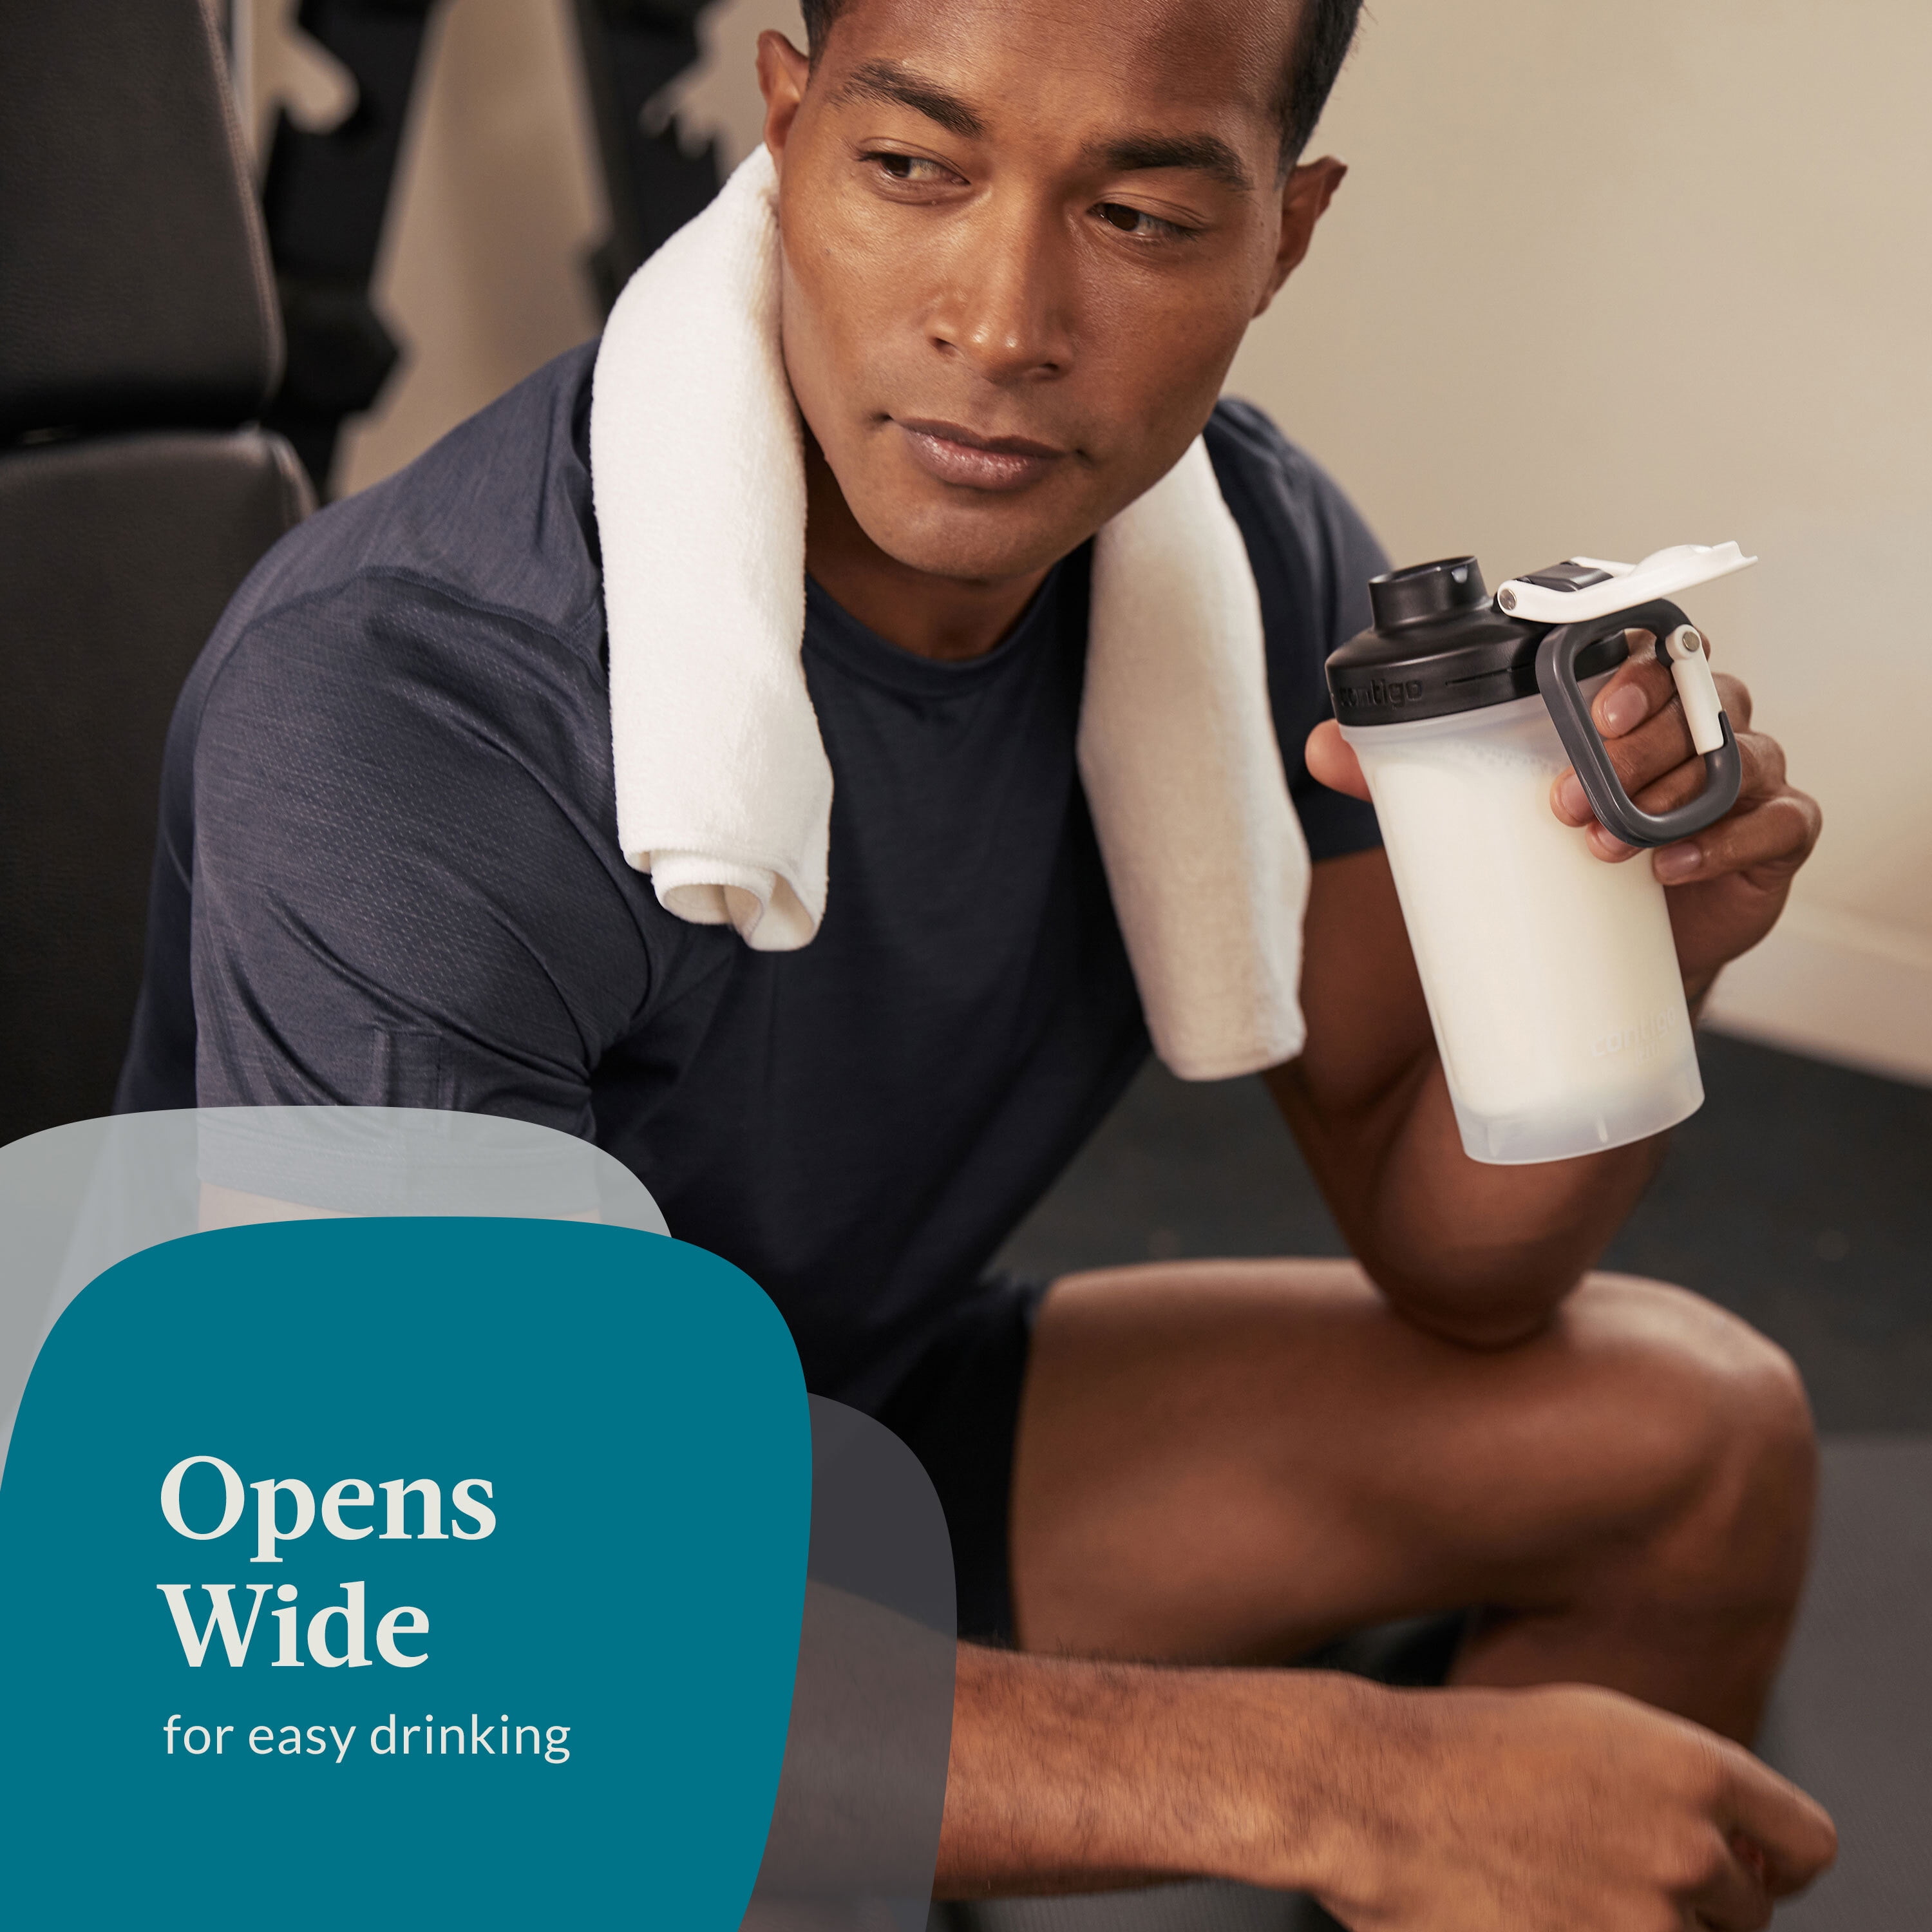 Contigo - Introducing the Contigo FIT Shake & Go 2.0 collection! Say hello  to your new favorite mixer bottle with an updated design, reimagined for  mess free transportation. Available in new sizes